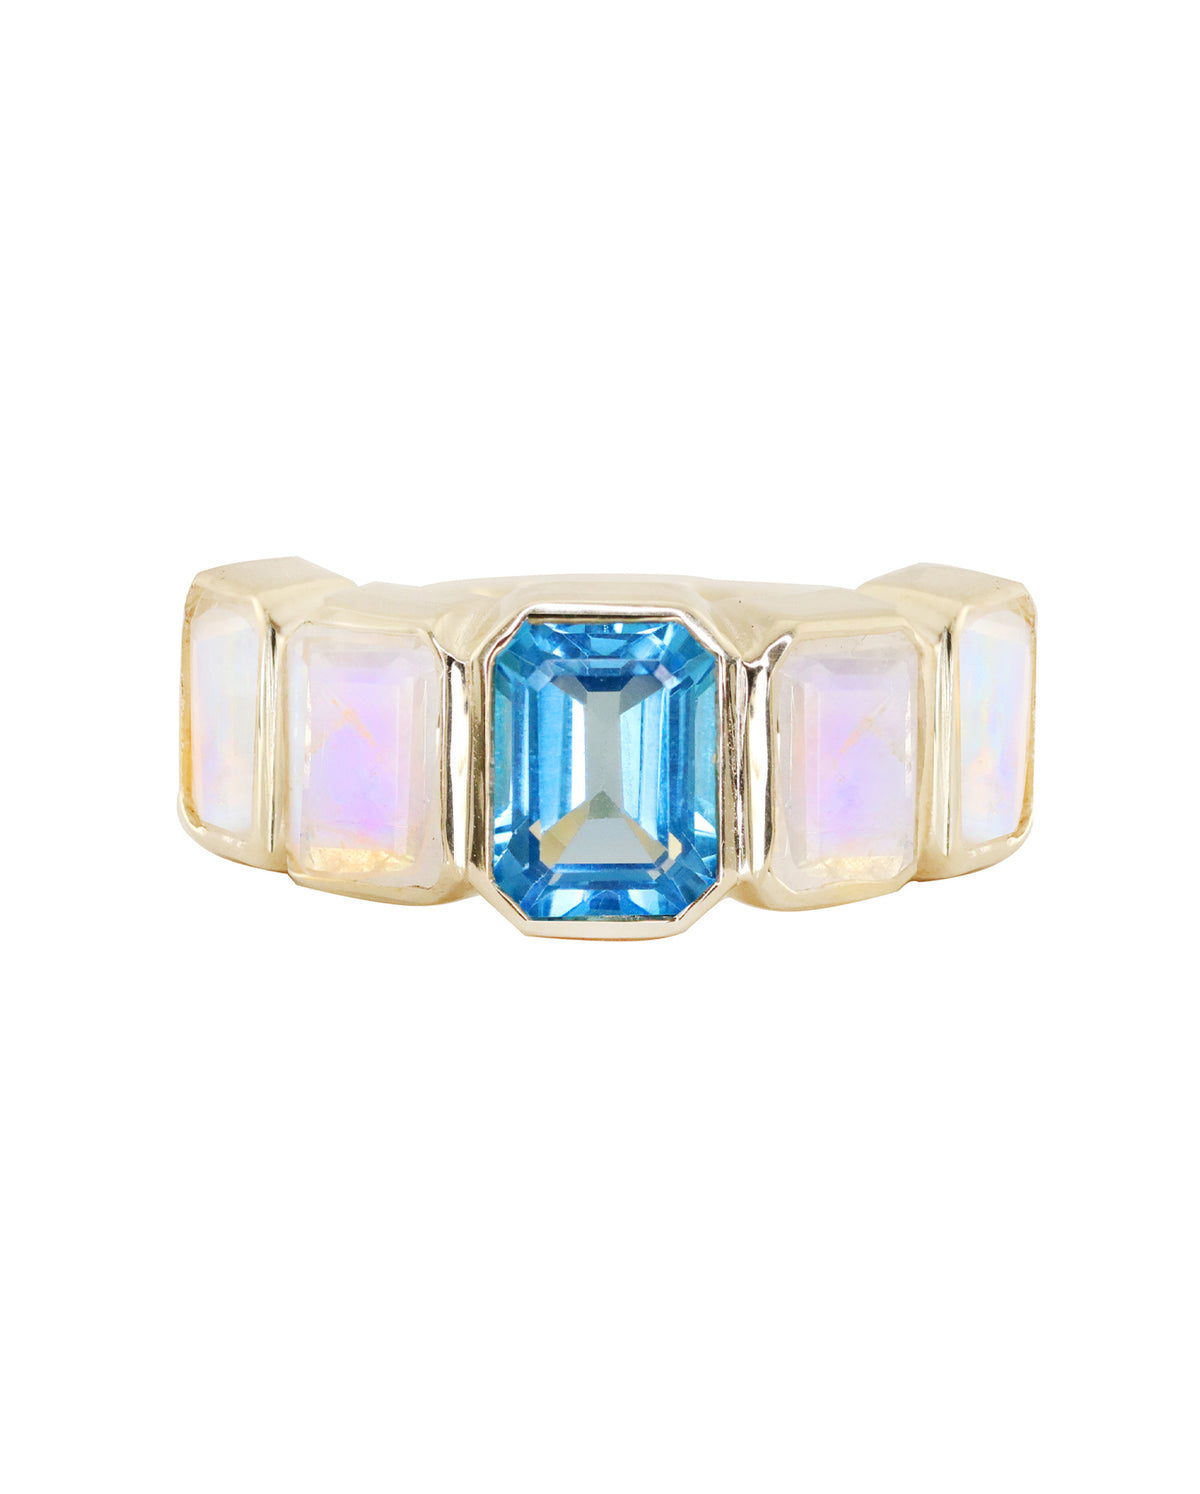 14Kt Gld Emerald Cut Moonstone And Blue Topaz Ring